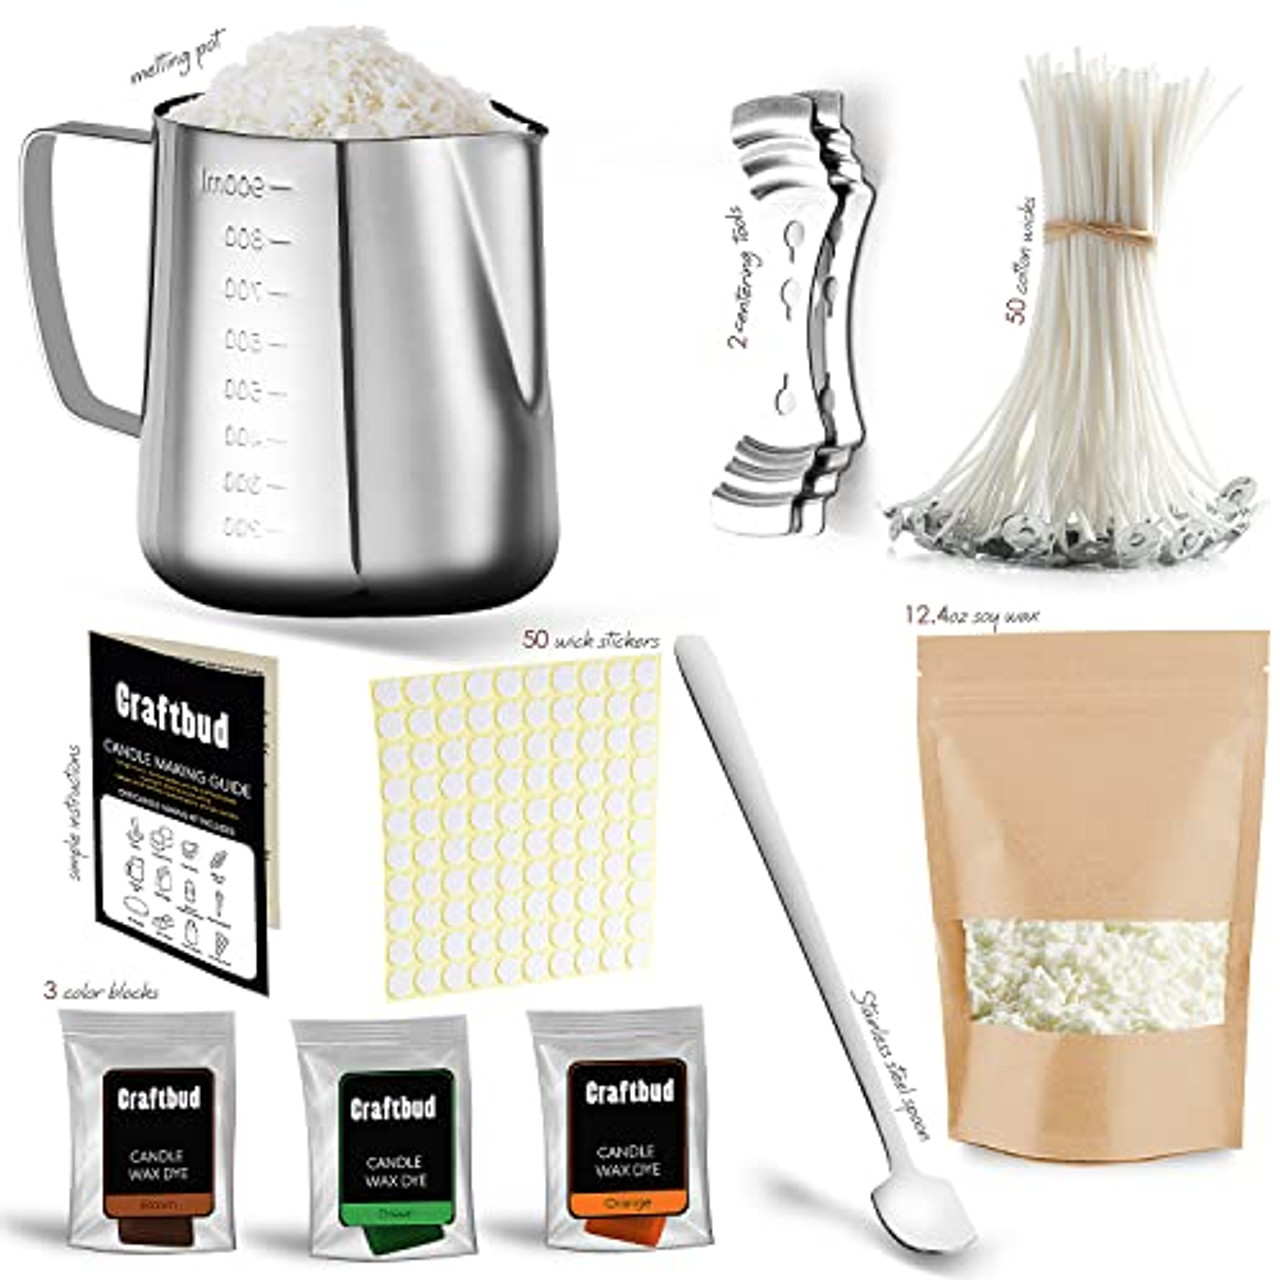 Ash & Harry Candle Making Kit with Natural Soy Wax for Candle